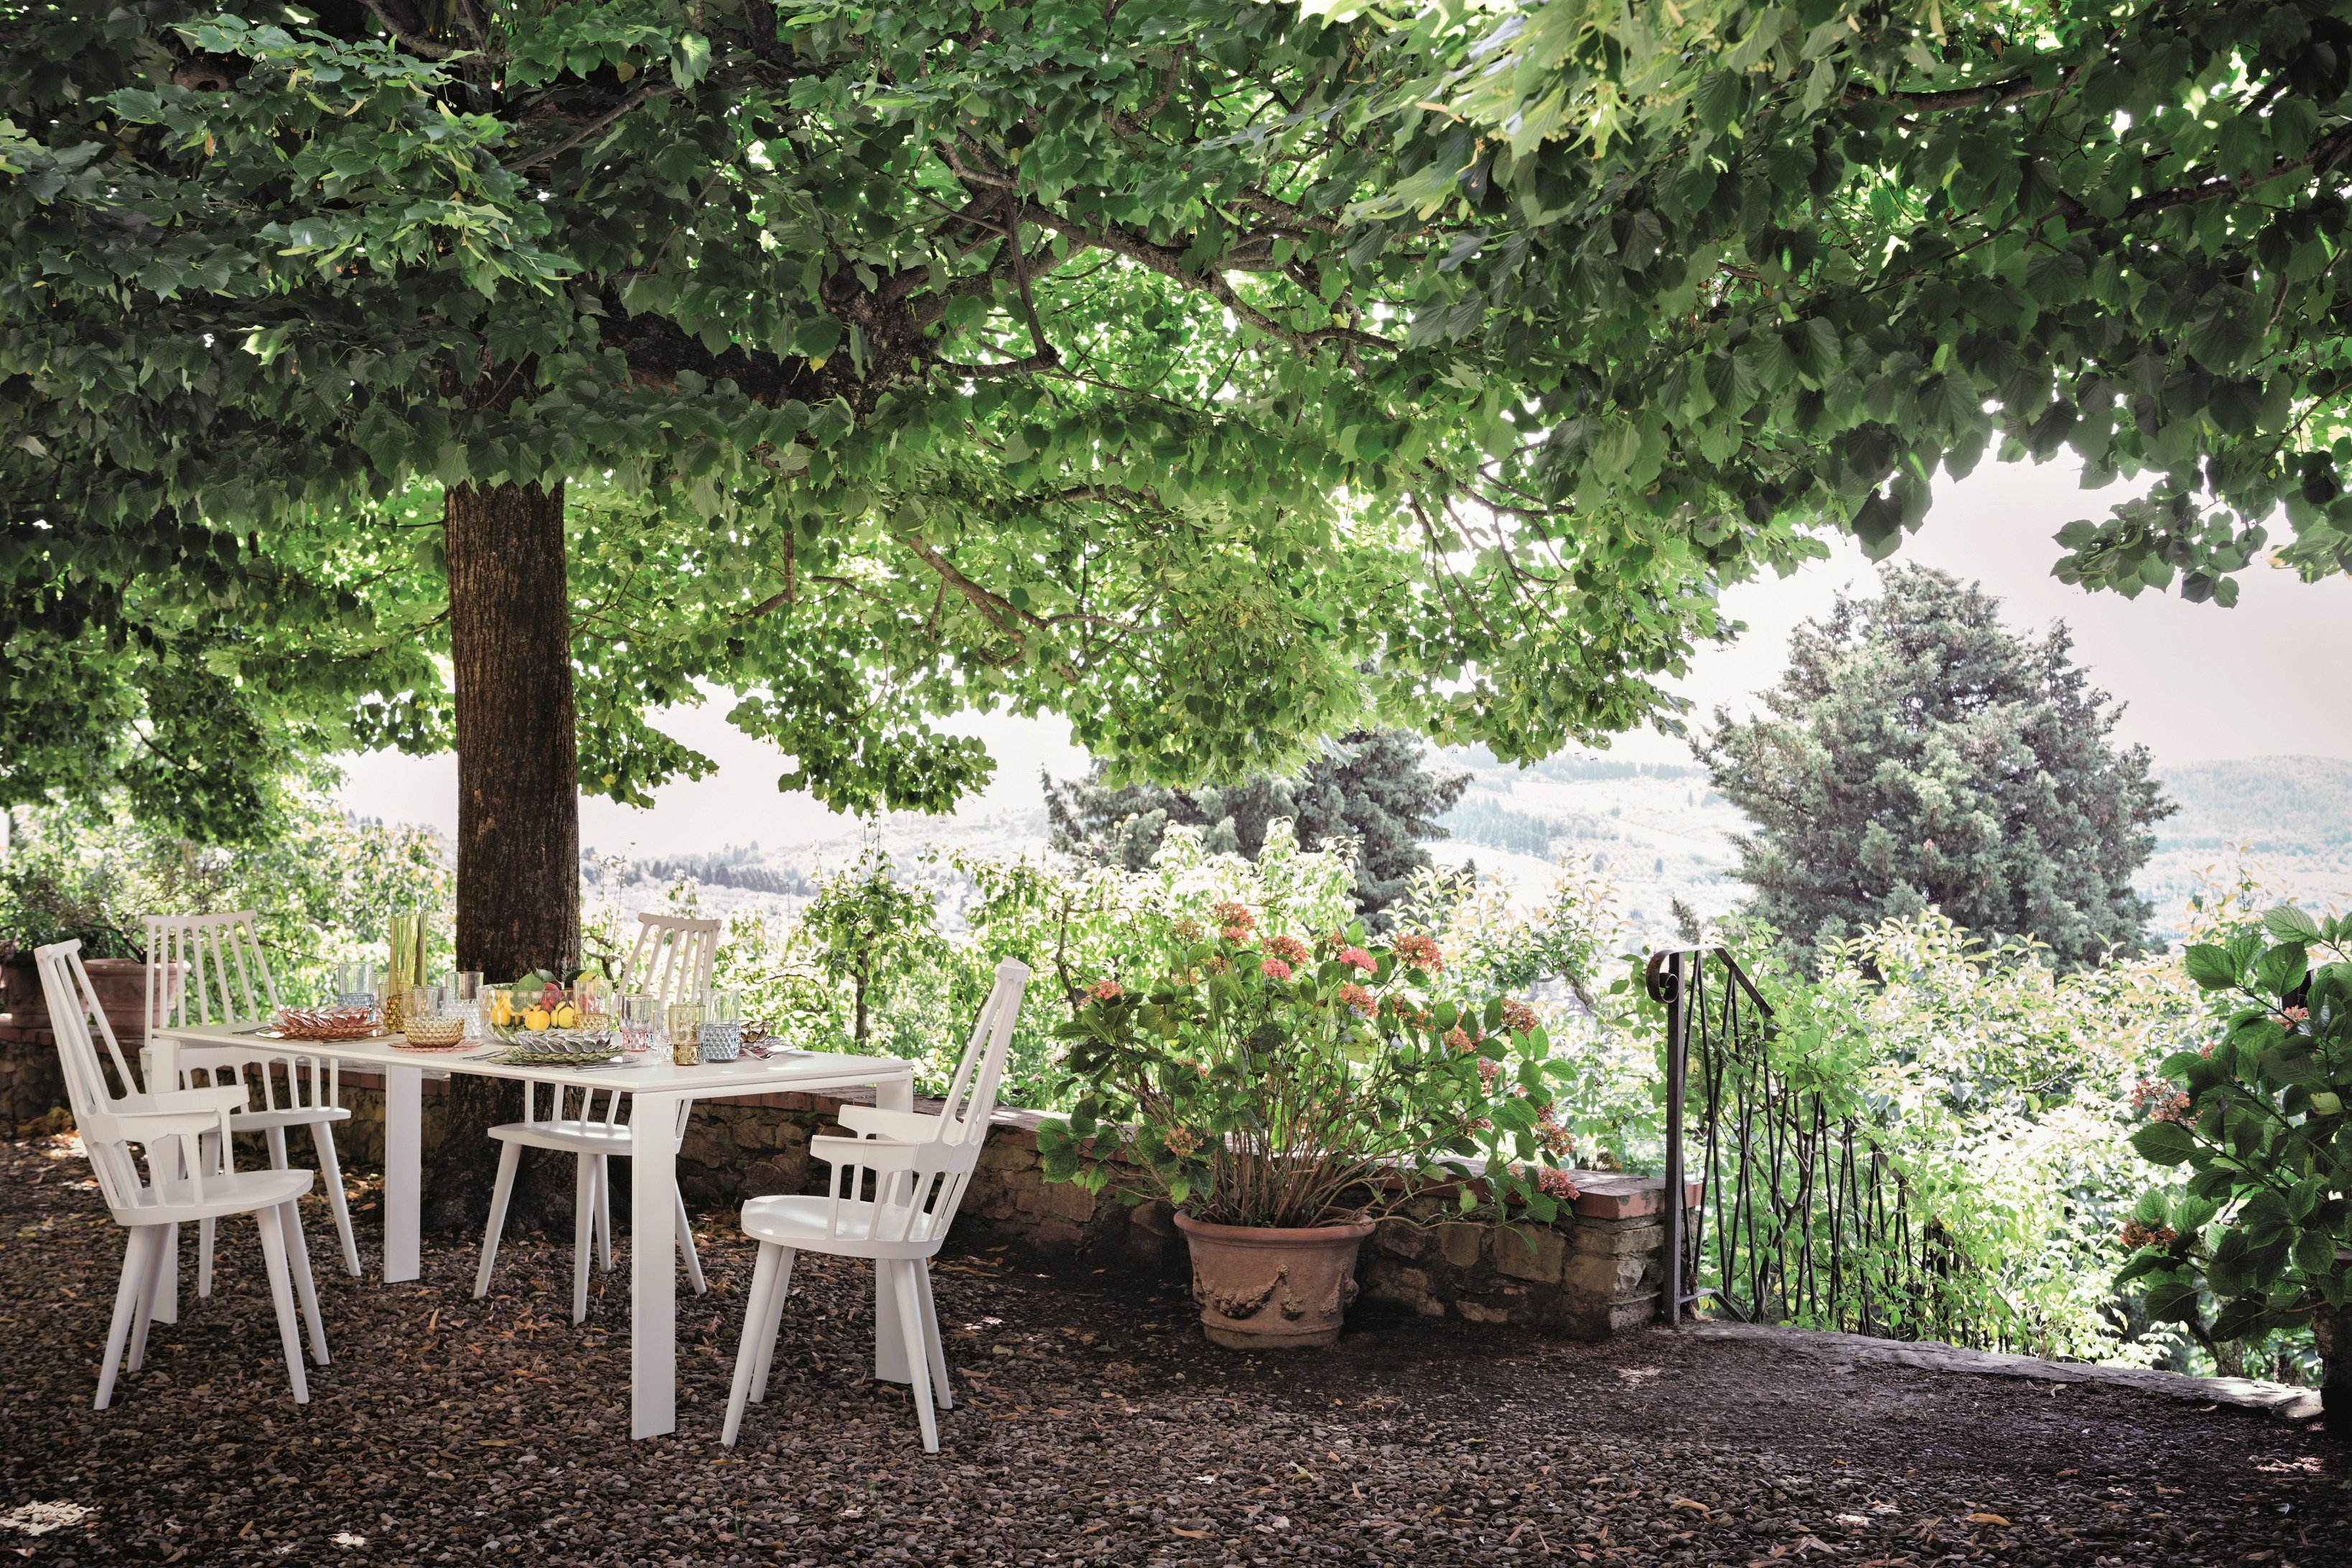 Outdoor dining scene with white furniture beneath a large tree